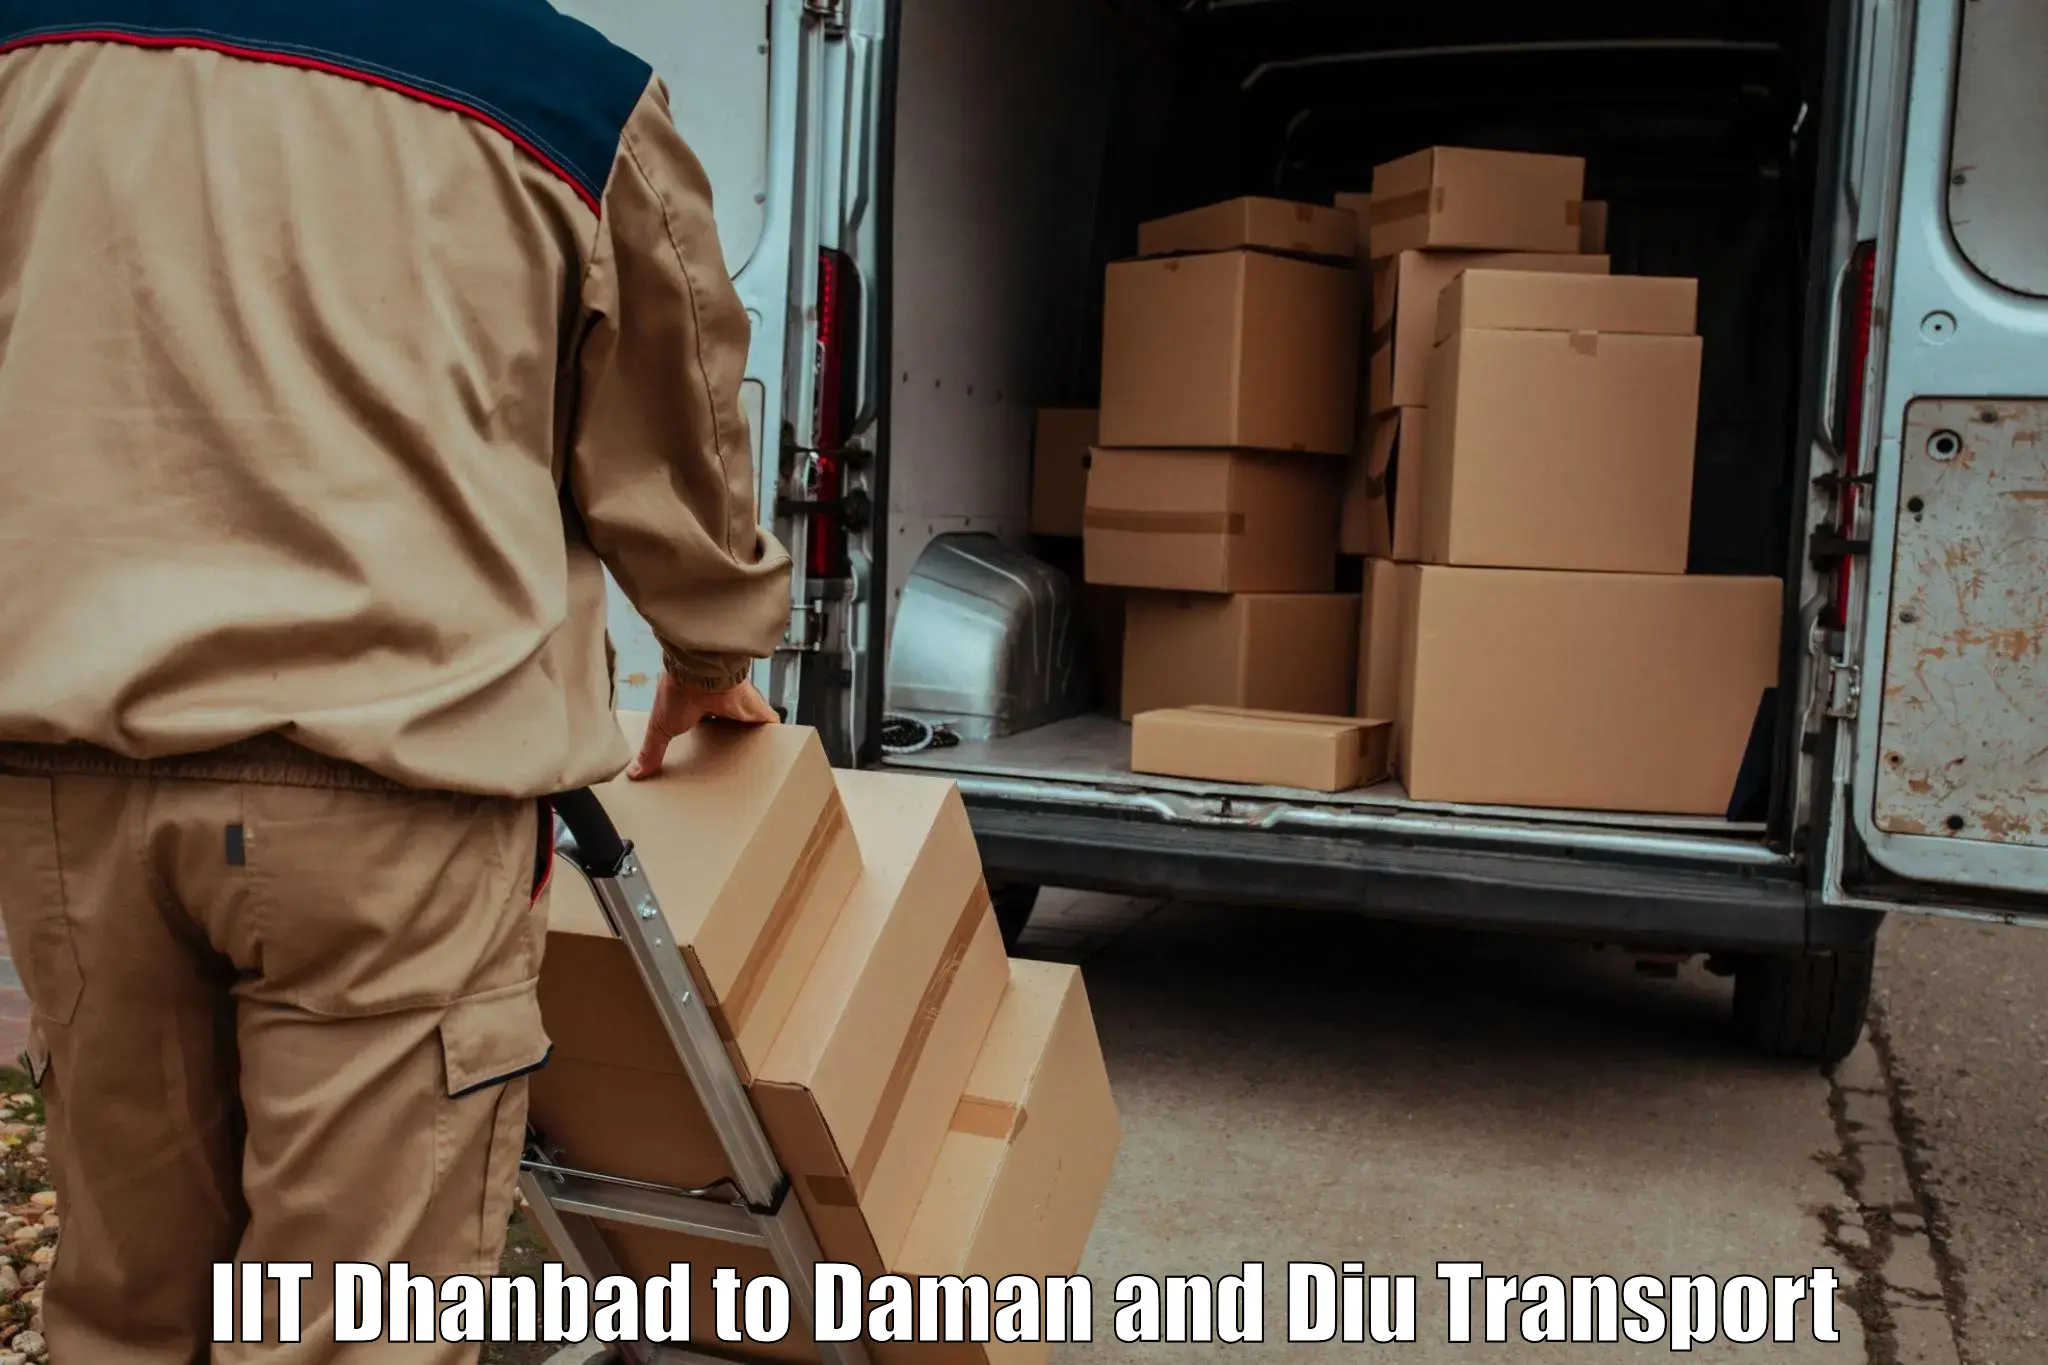 Commercial transport service IIT Dhanbad to Diu